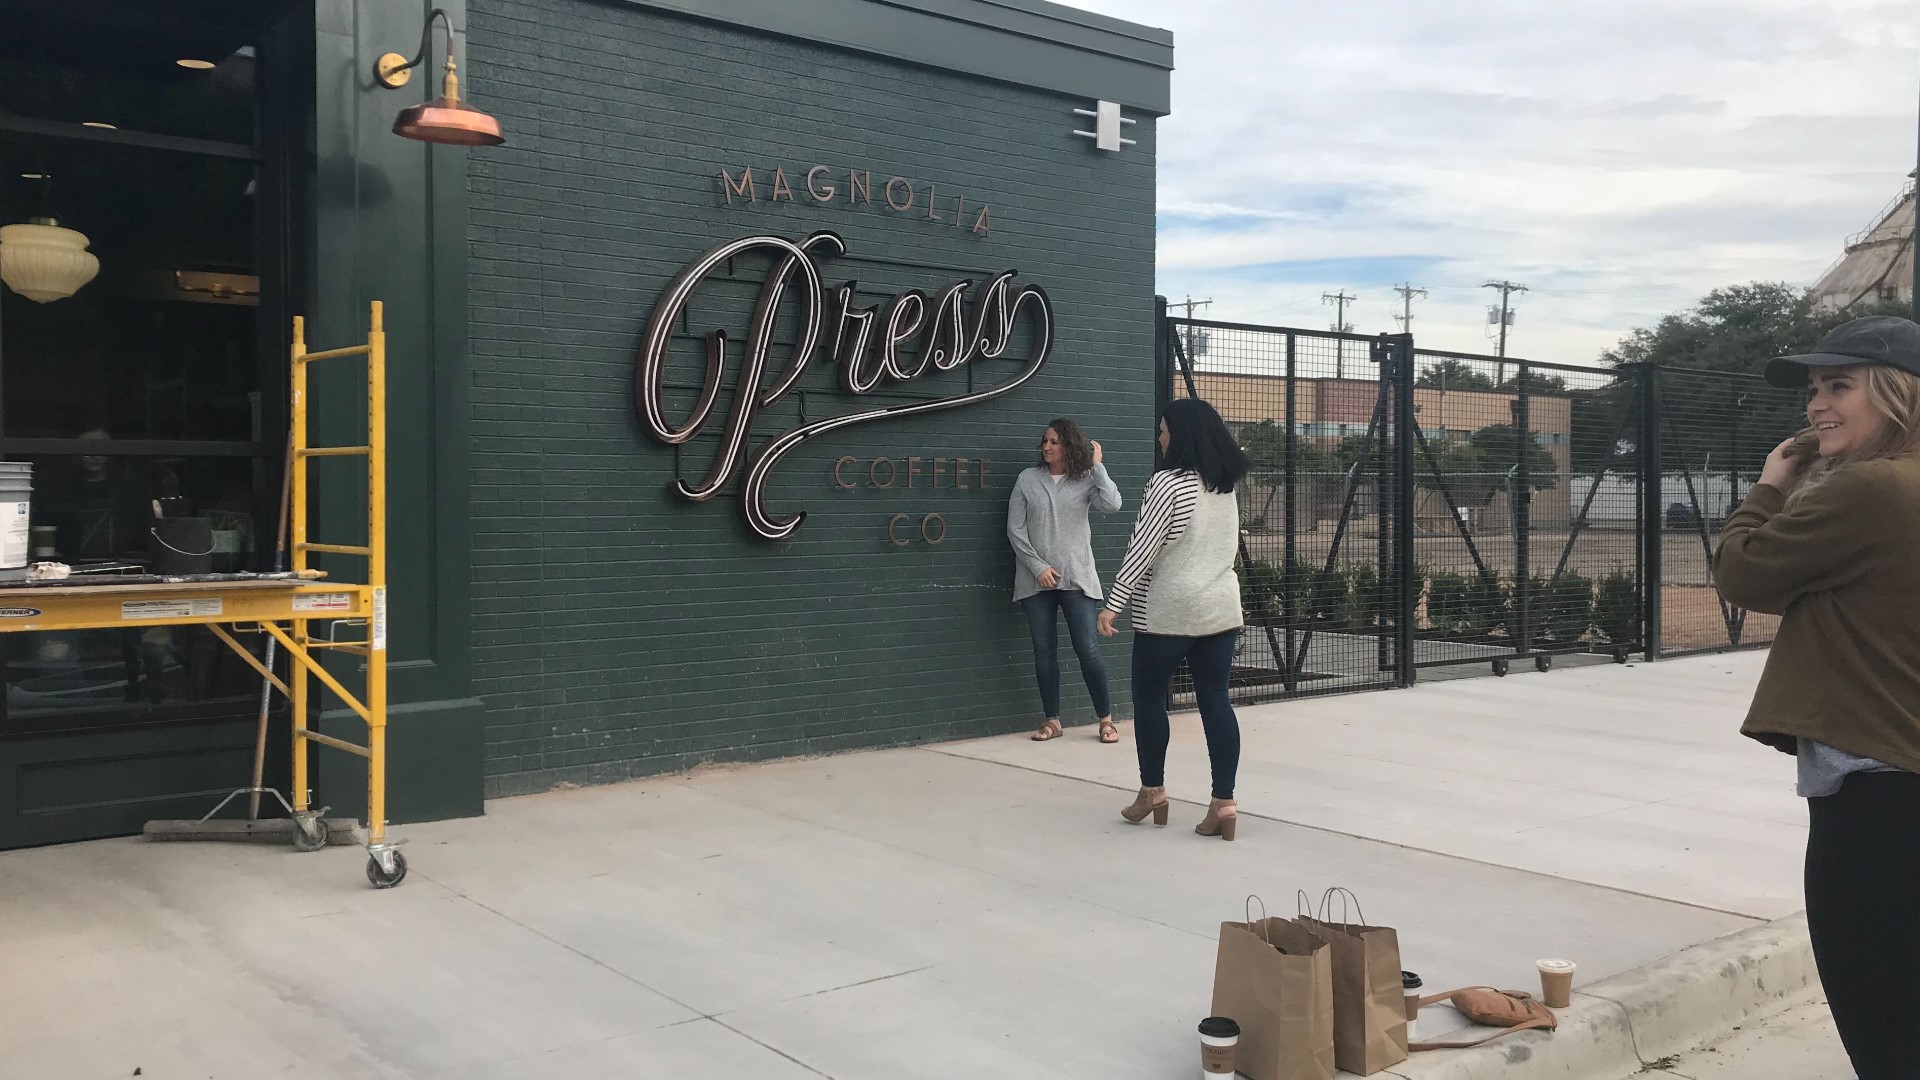 Joanna Gaines tweeted out design photos of the Magnolia Press coffee shop in July and now it's here!